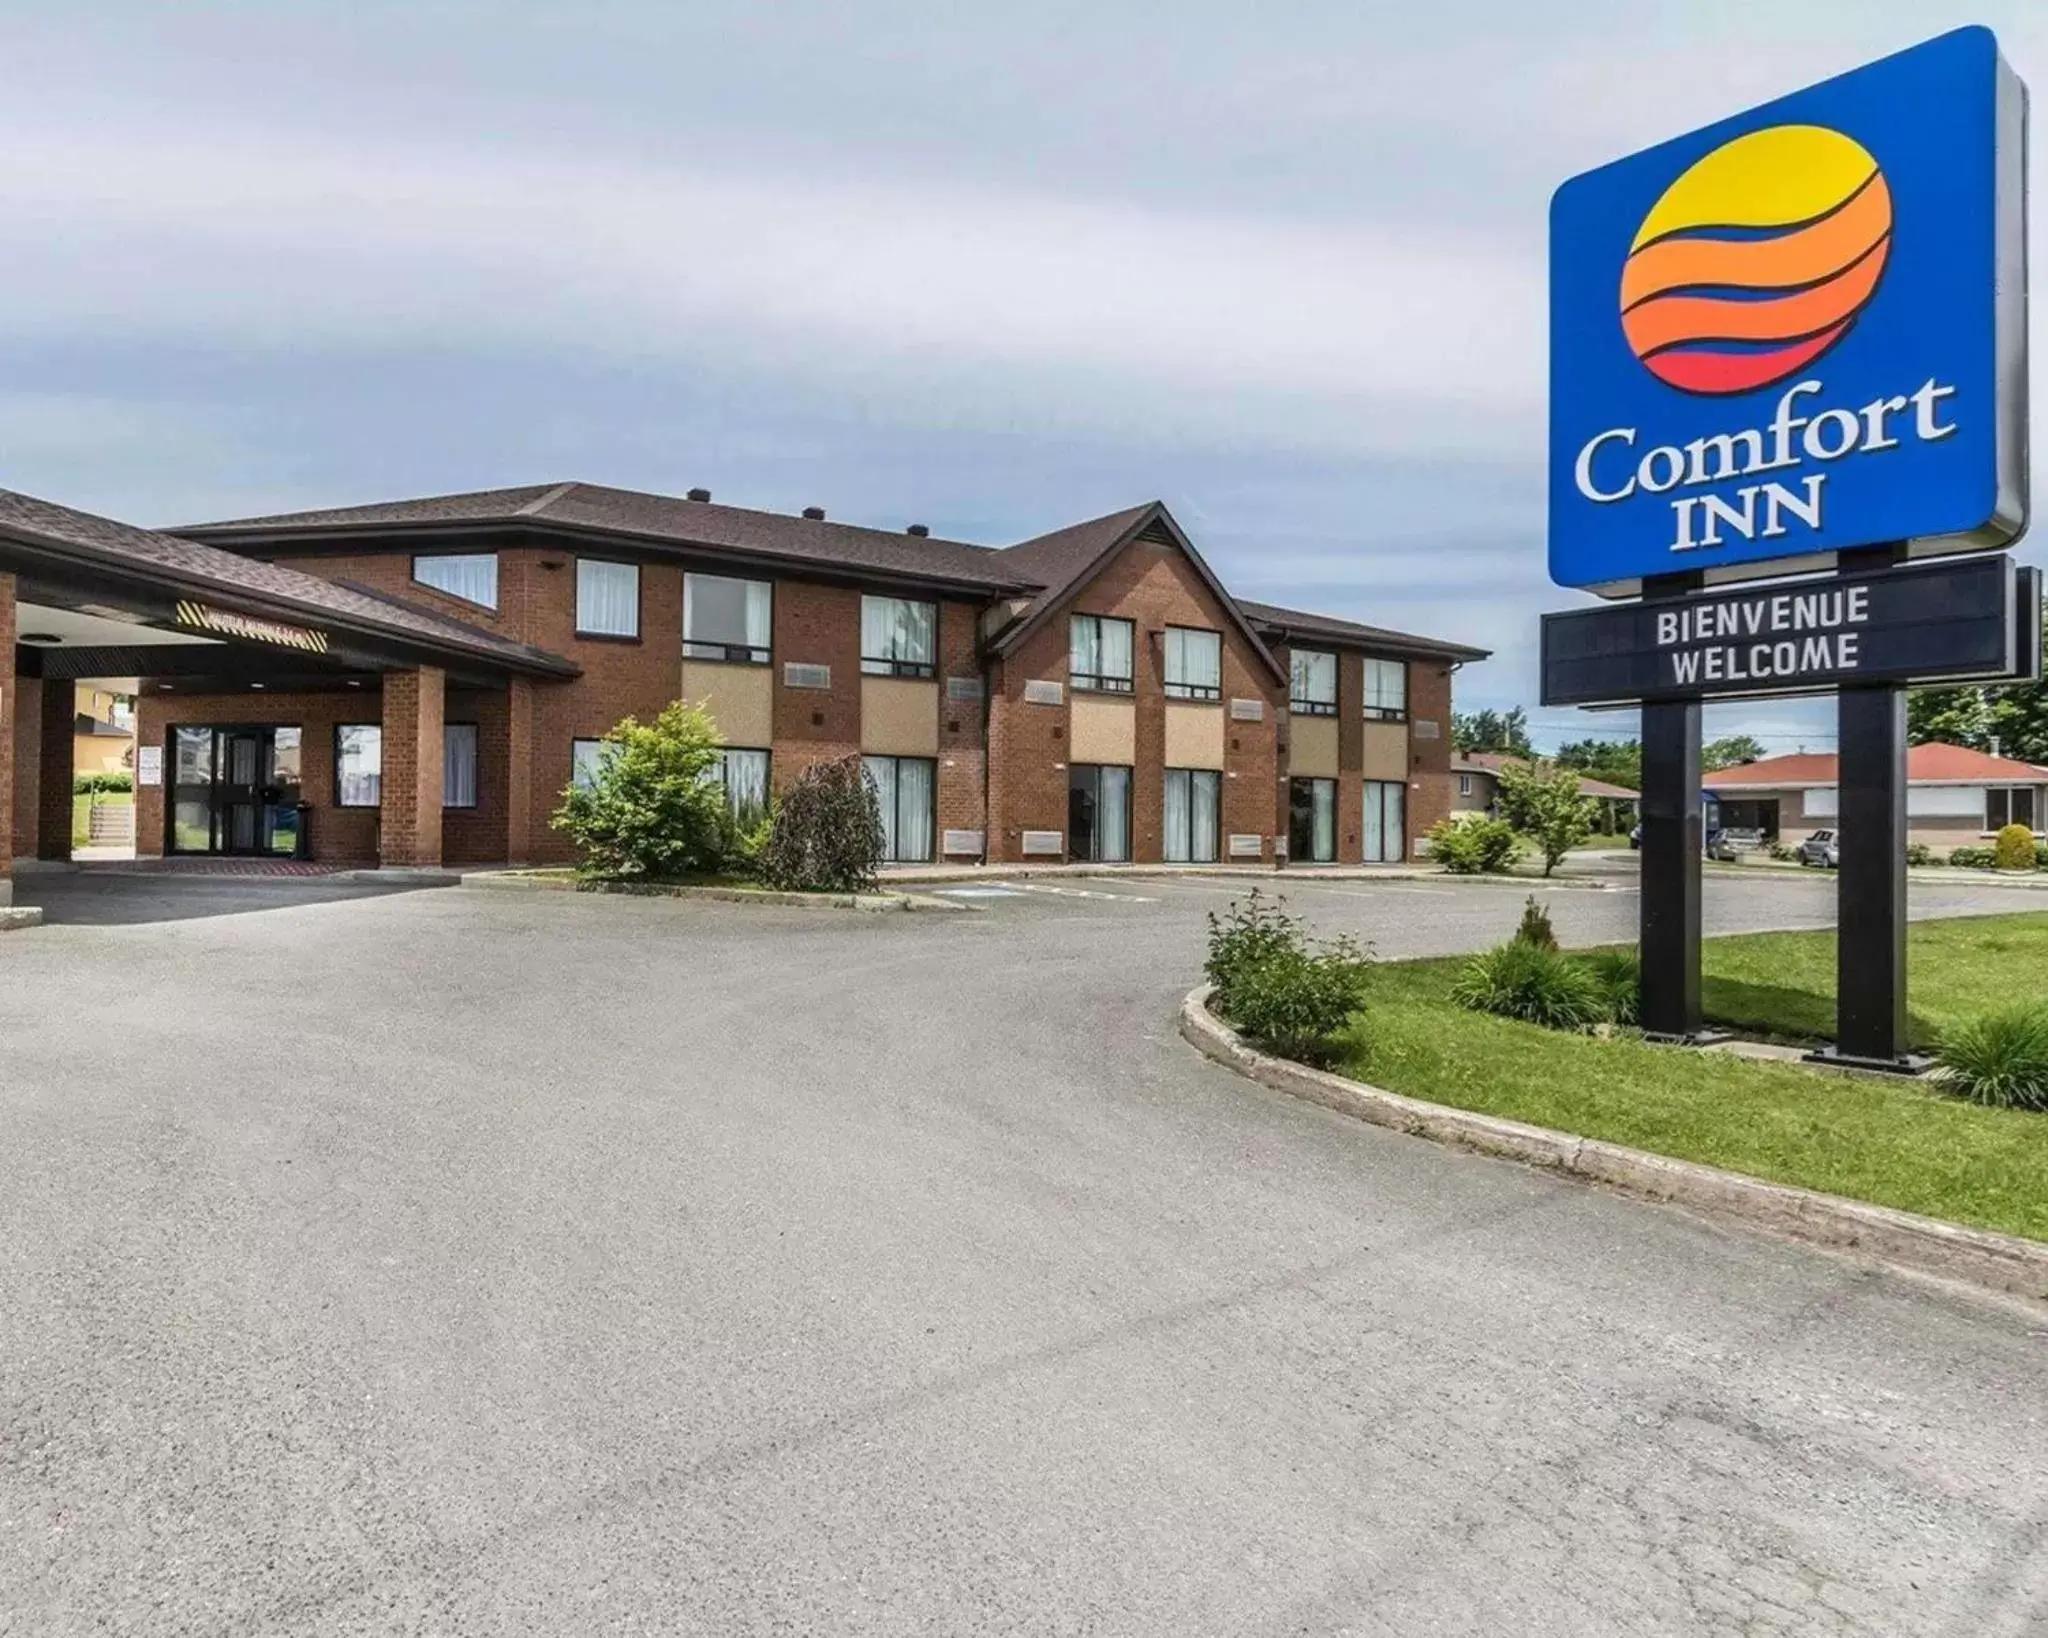 Property building in Comfort Inn Thetford Mines